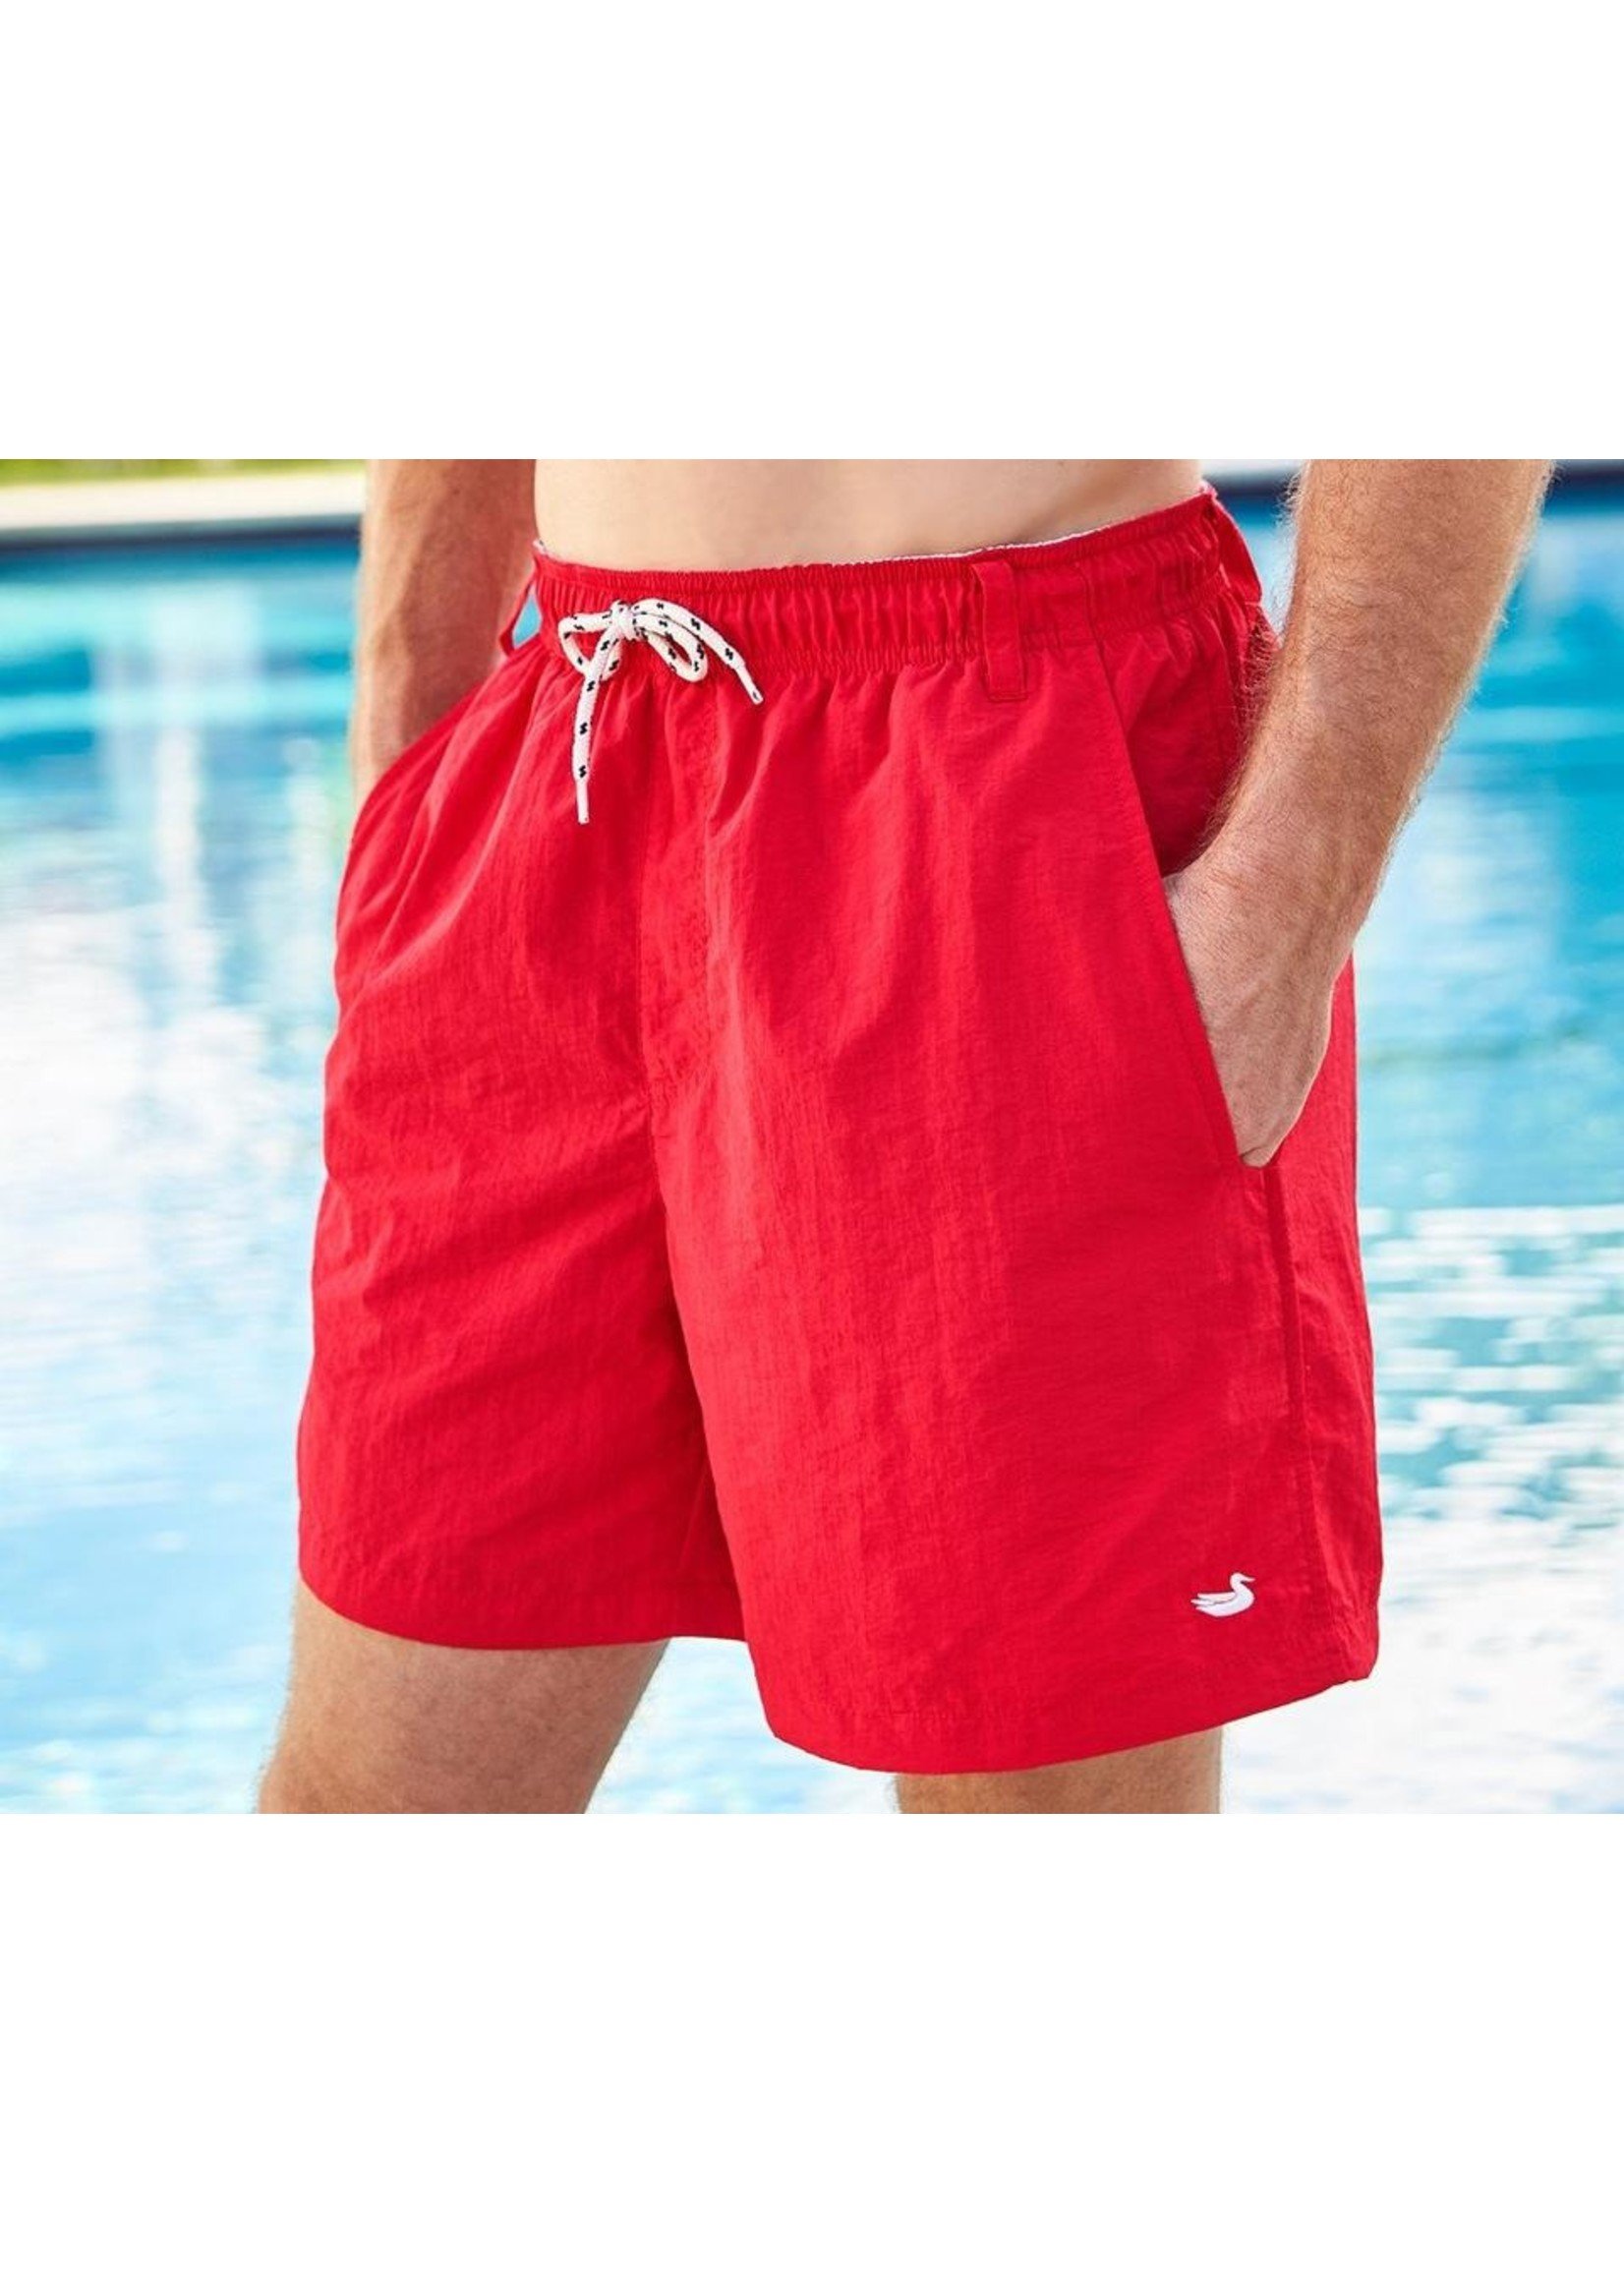 Southern Marsh The Dockside Swim Trunk - Solid